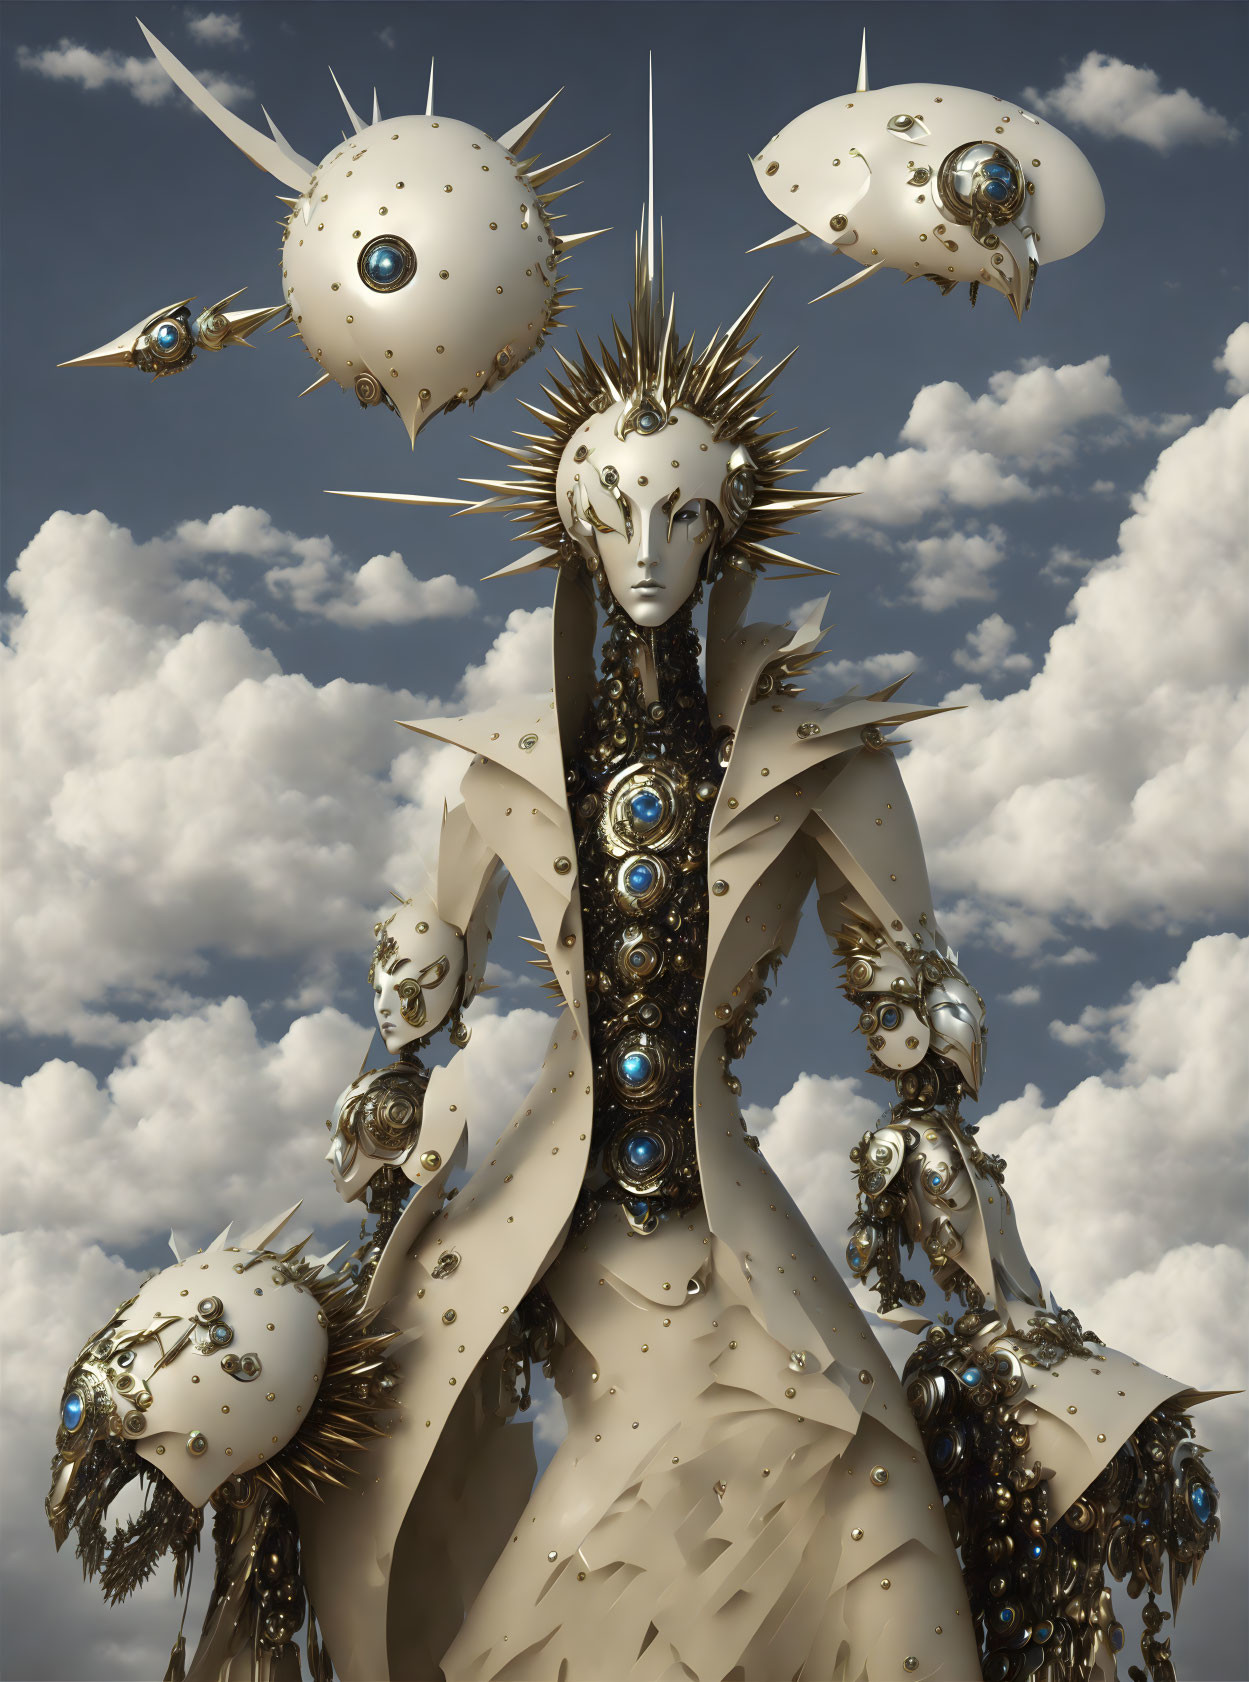 Surreal figure in metallic attire with blue gemstones against cloudy sky.